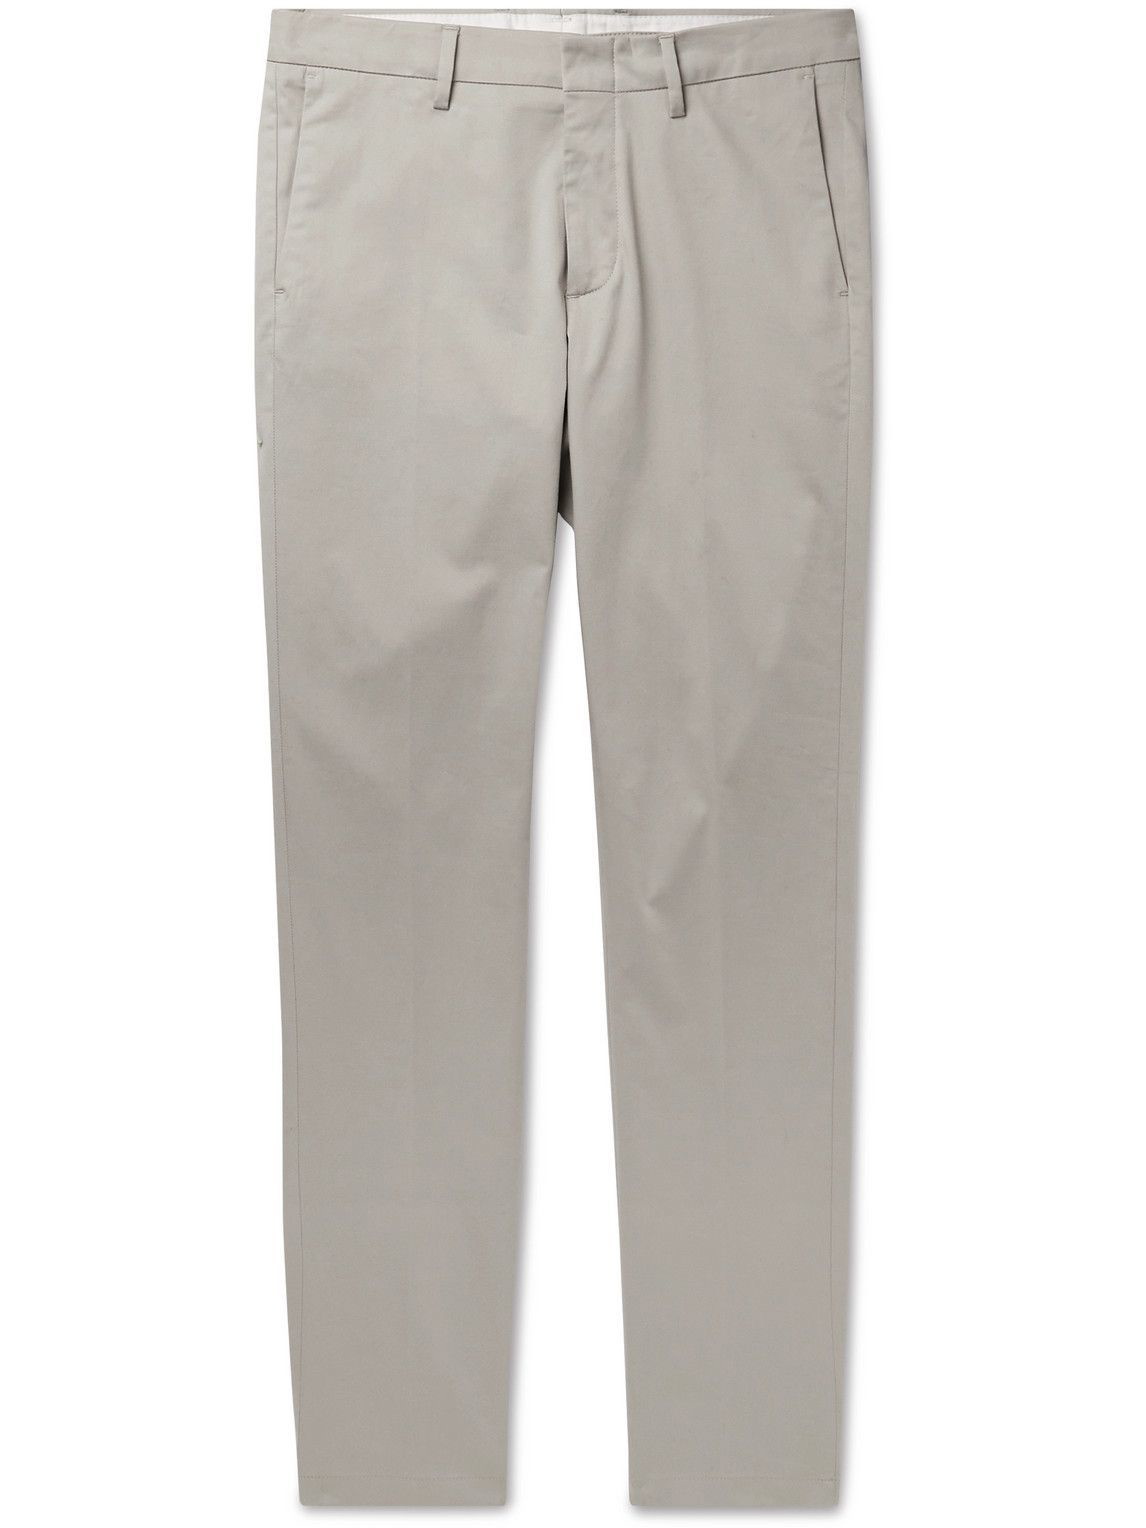 Dunhill - Tapered Stretch Cotton and Mulberry Silk-Blend Chinos - Gray ...